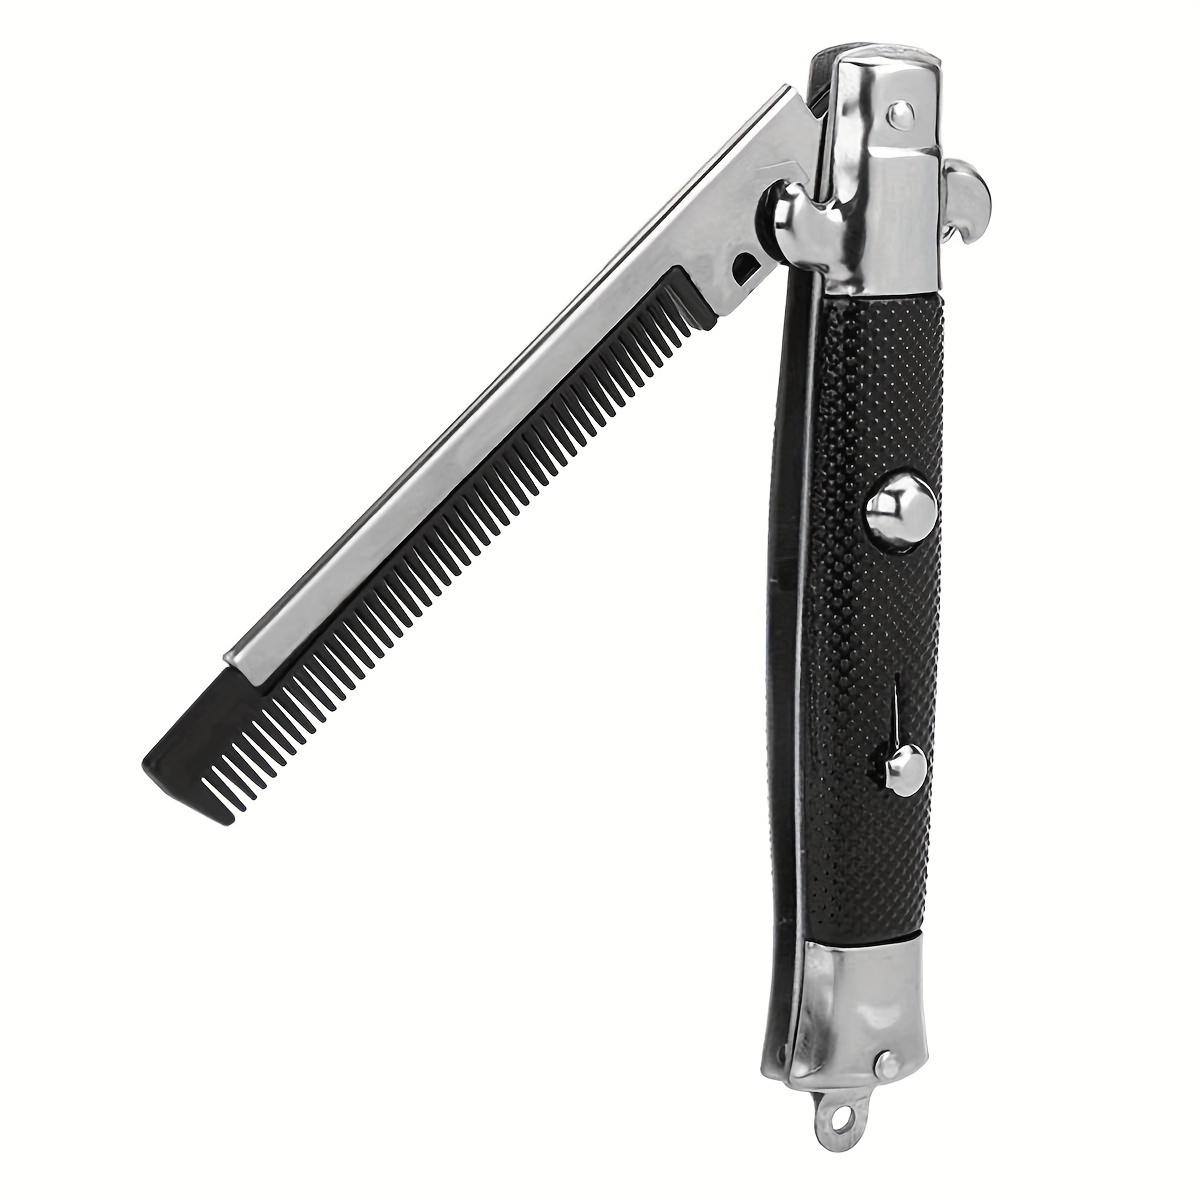 Buy Stainless Steel Hair Beard Styling Comb at Lowest Price